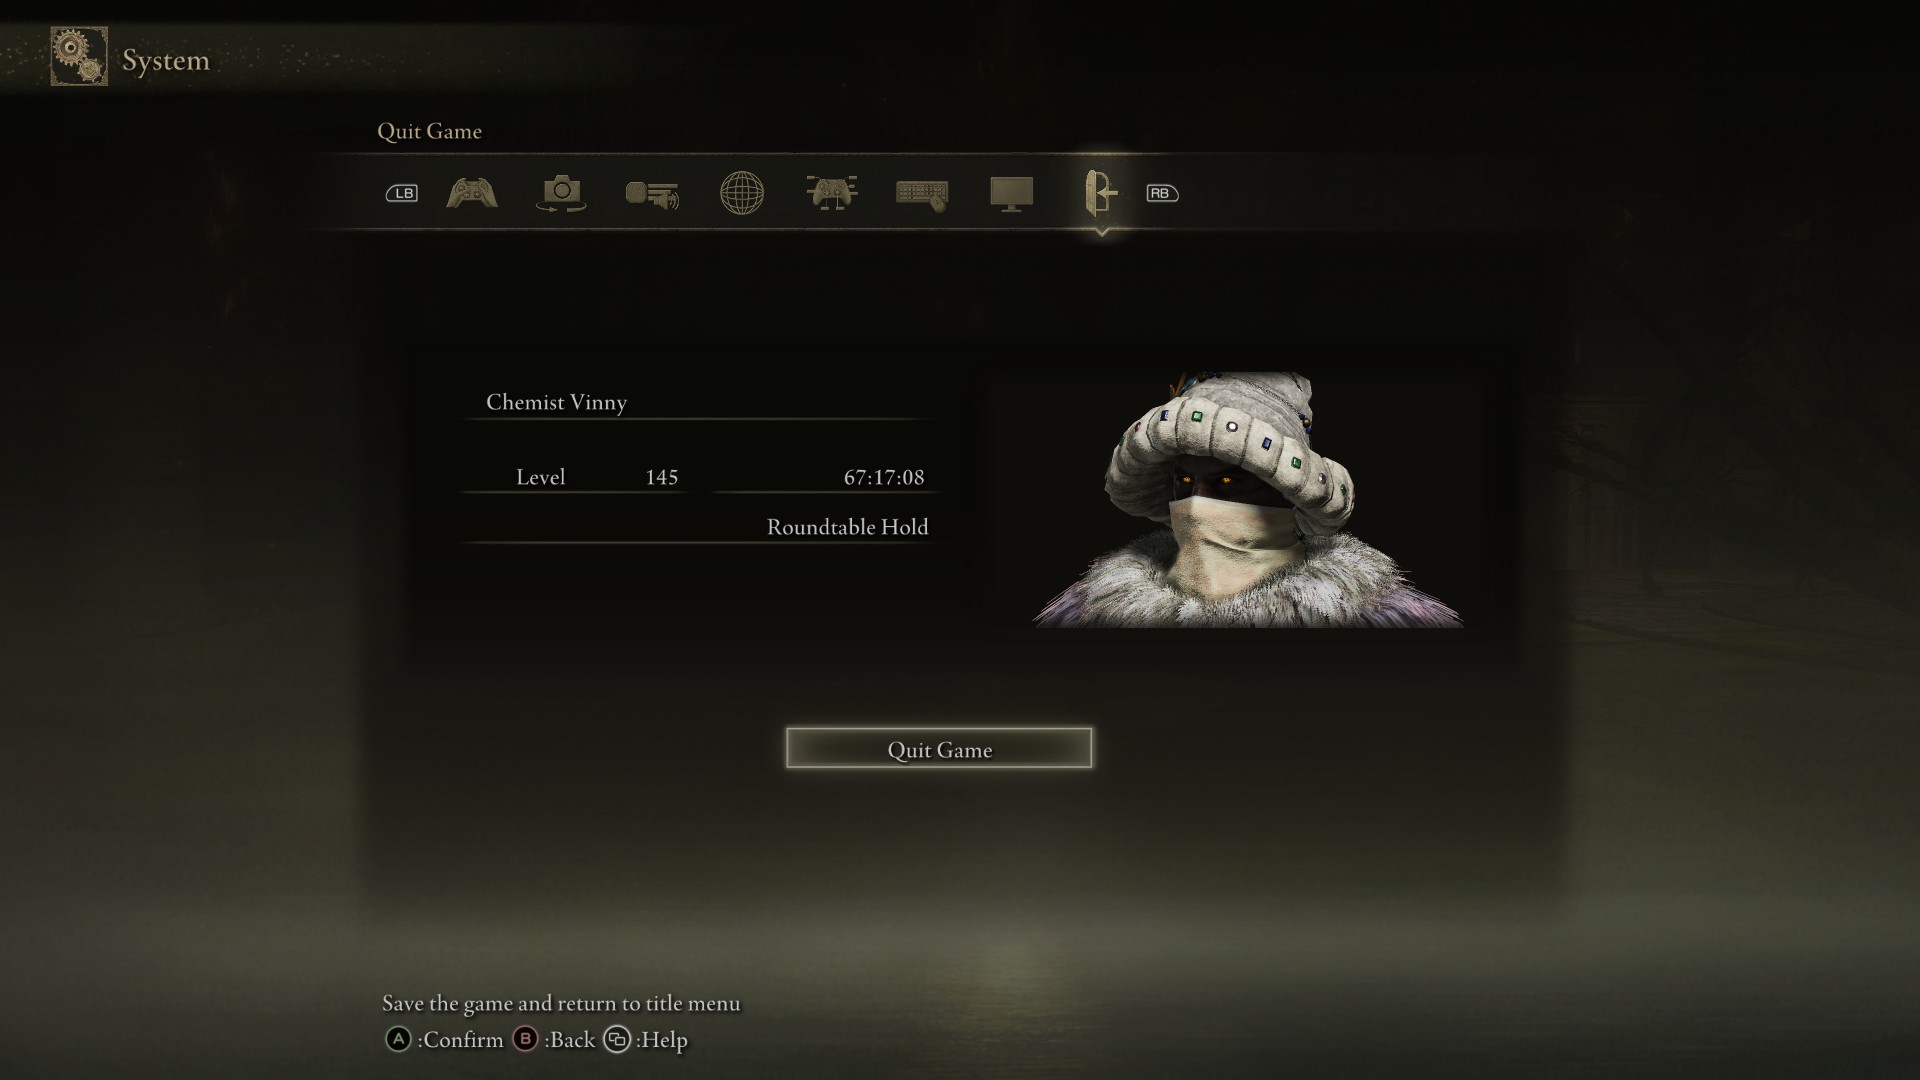 Screenshot from Elden Ring: The "Quit Game" menu from the Chemist Run file, which reads the character name and level: "Chemist Vinny, Level 145," and which lists the total playtime: 67 hours 17 minutes and 8 seconds.